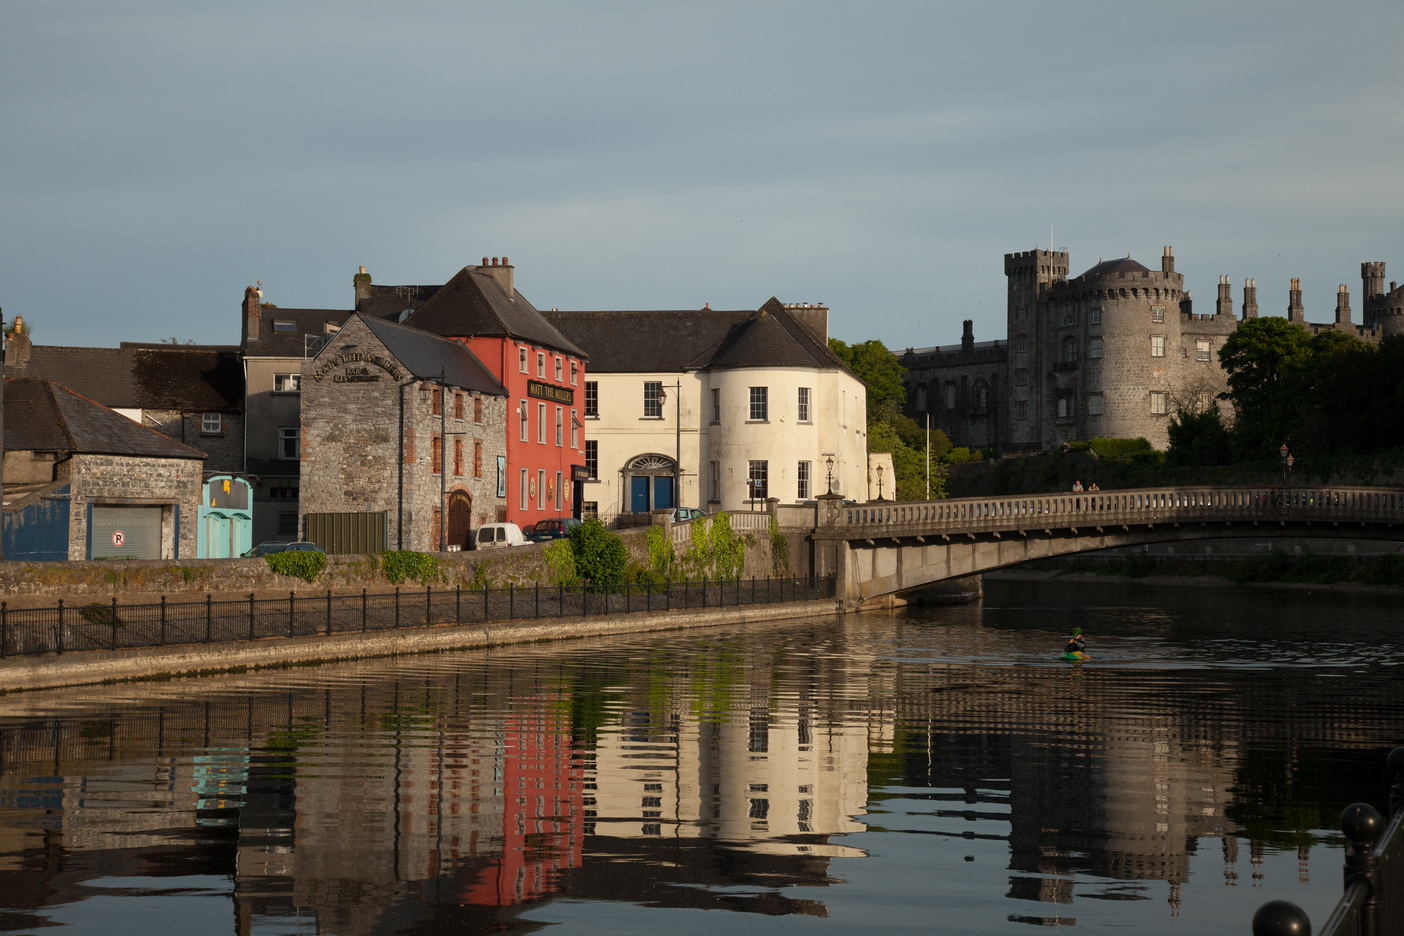 Kilkenny Castle and River Nore